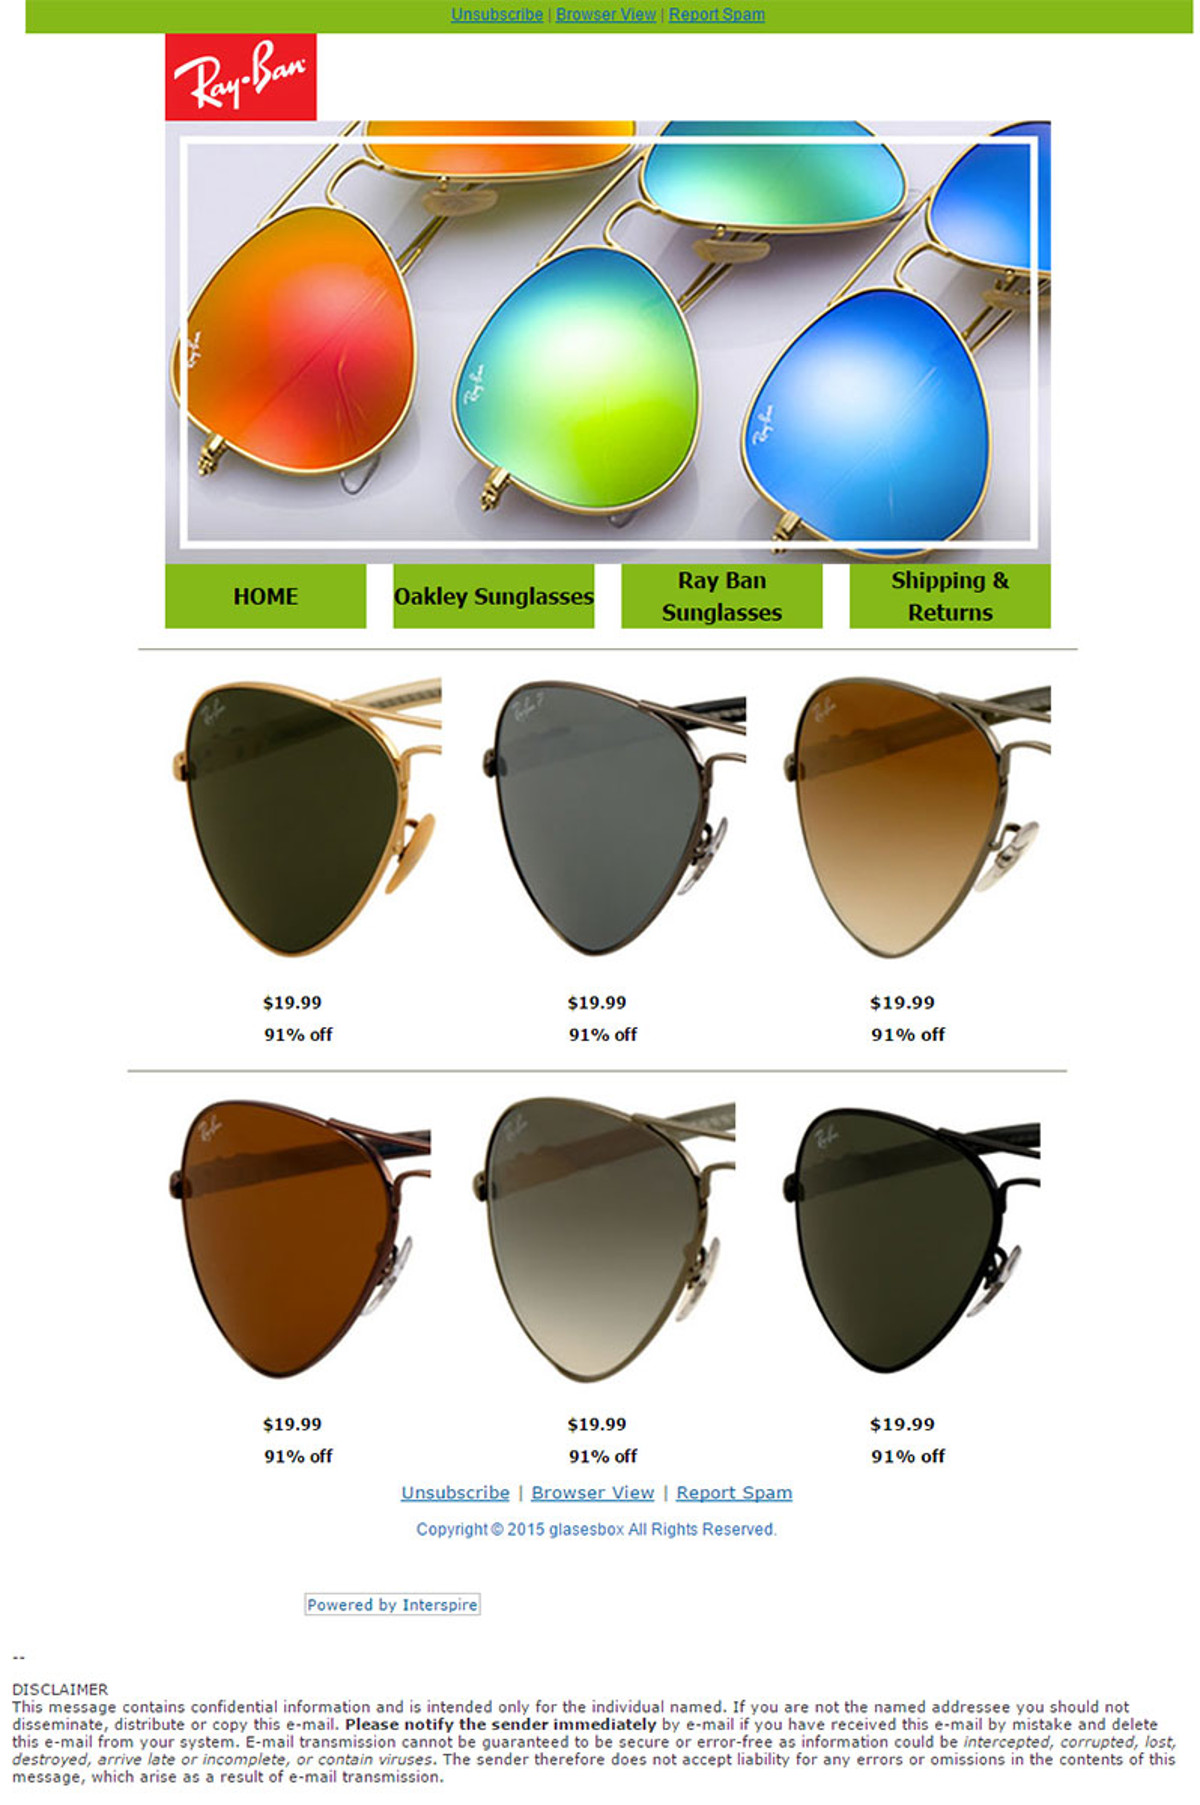 what is ray bans official website